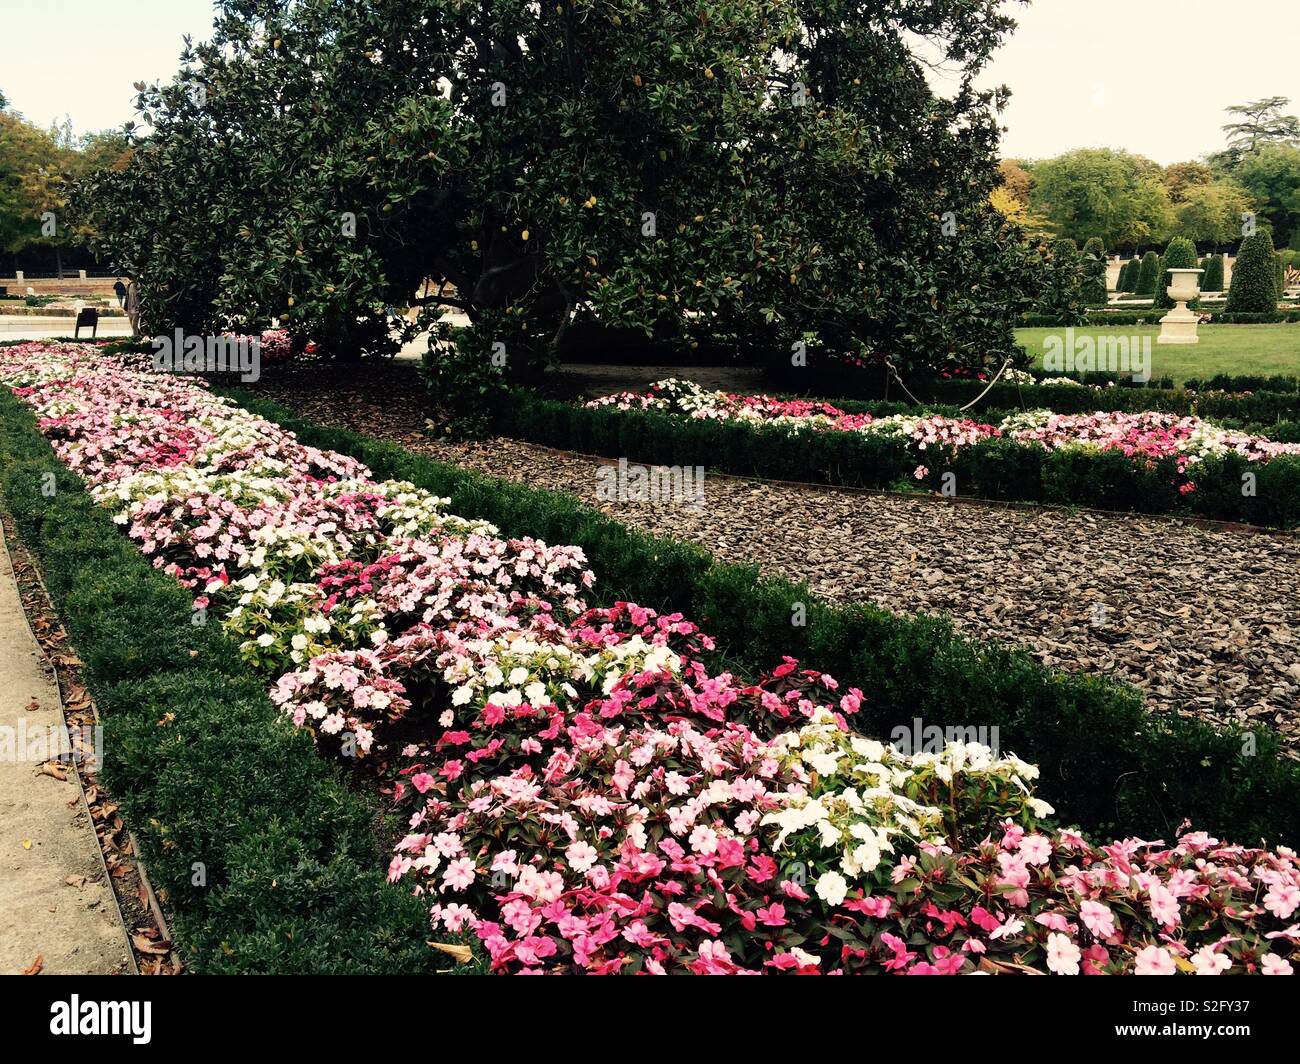 Border of vibrant pink and white flowers in landscaped garden along pathway in Madrid Spain Stock Photo